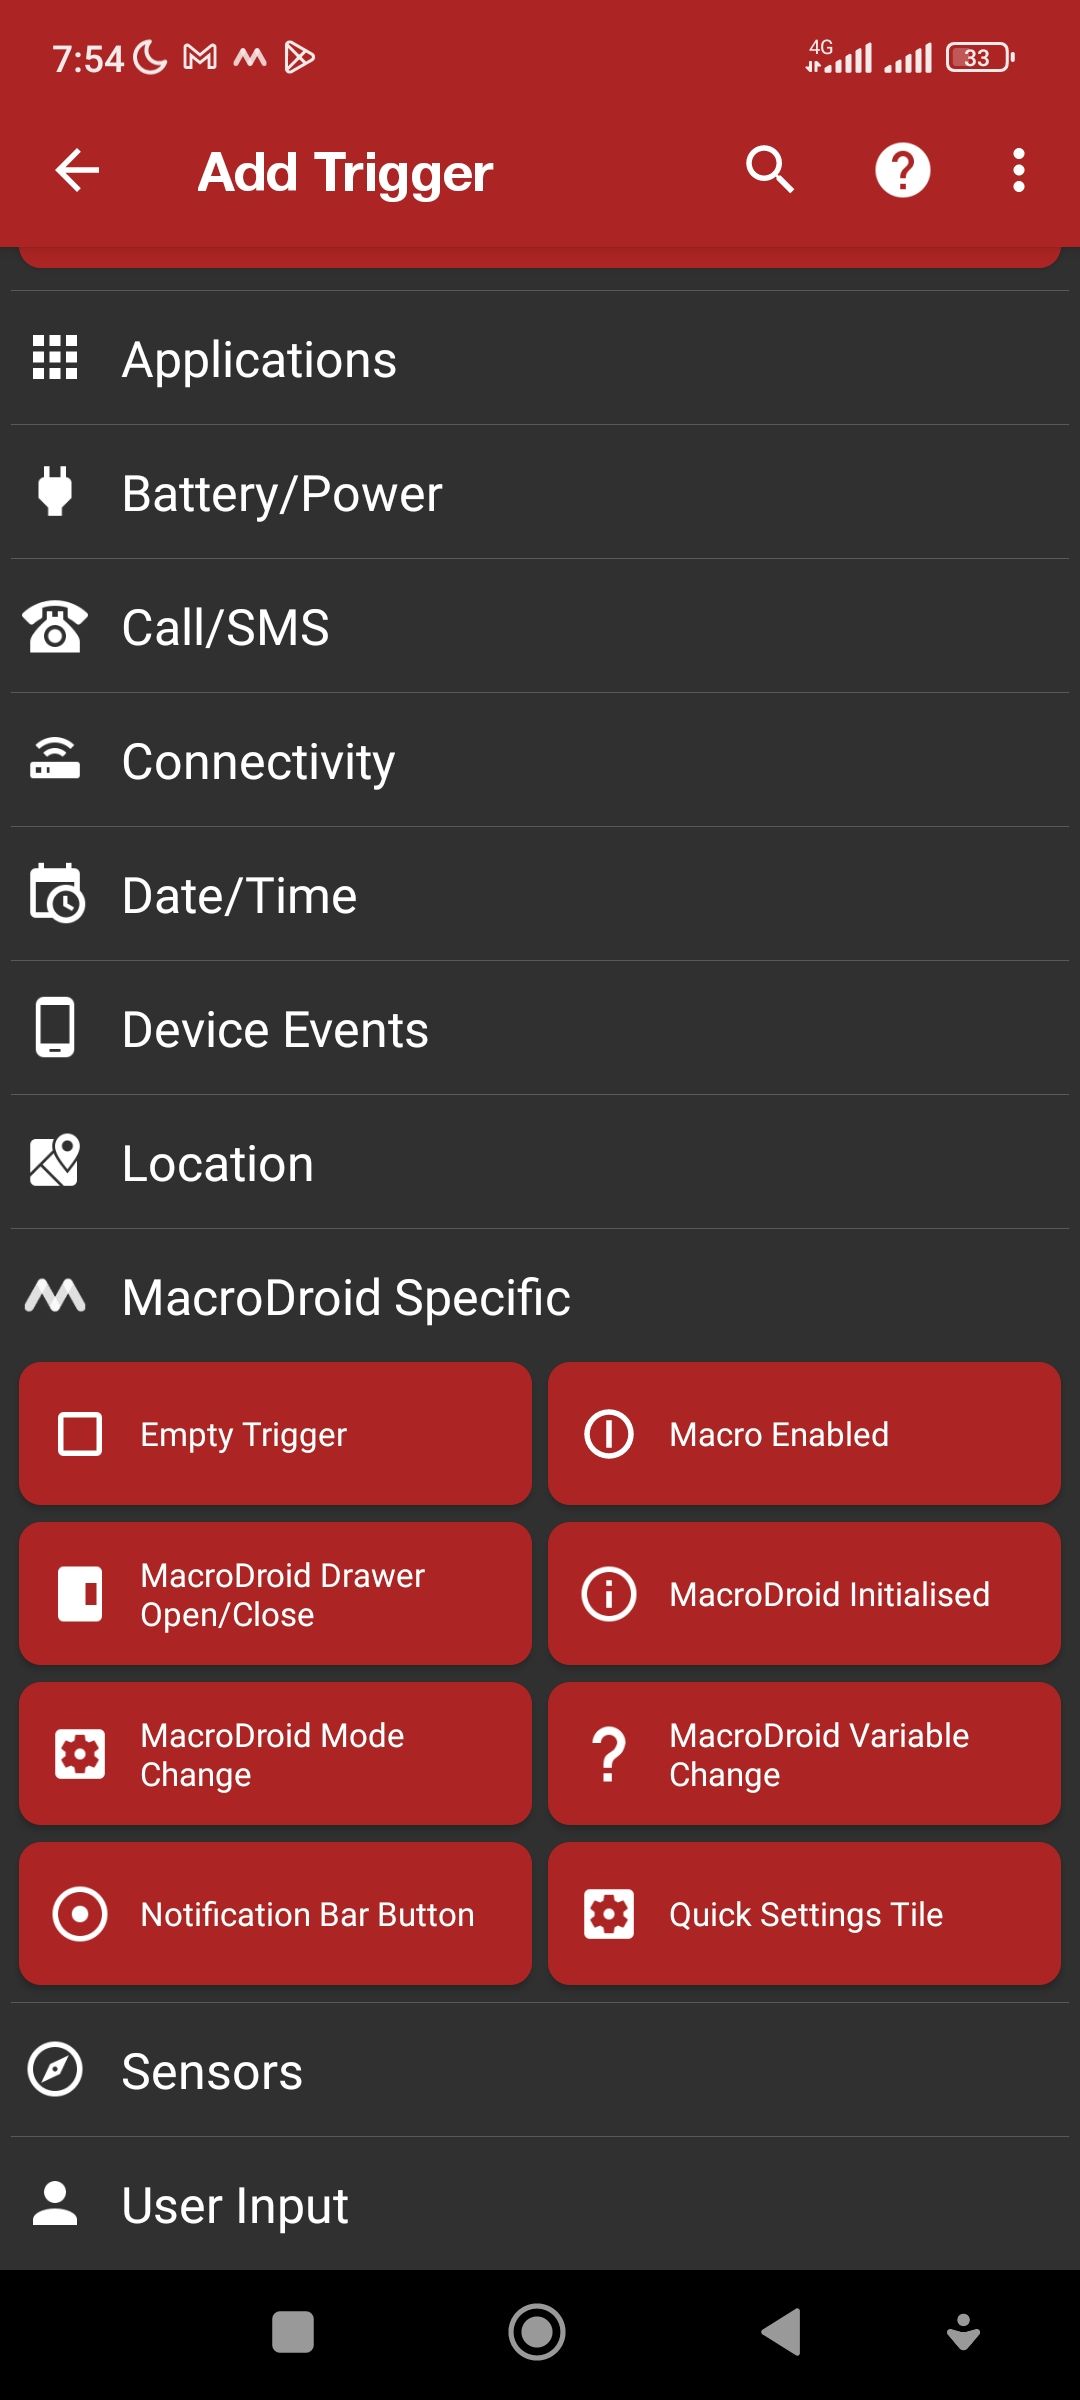 Adding a quick settings tile as a trigger on MacroDroid